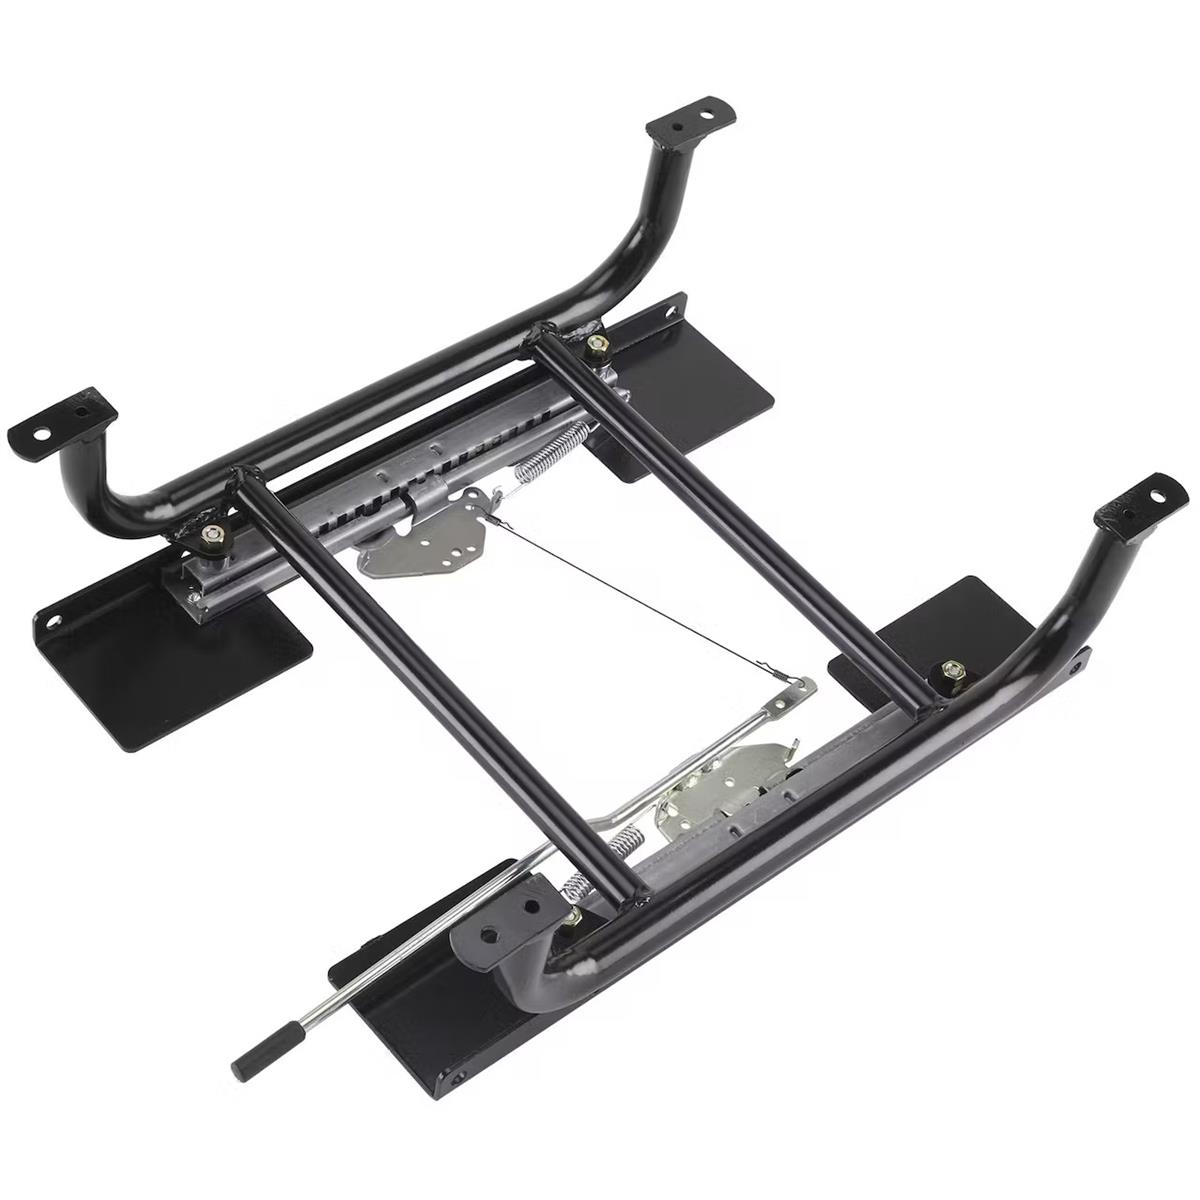 COM-5753 | COM-5753 Universal Seat Mounting Frame with Slider and Mounts Common Application4.jpg